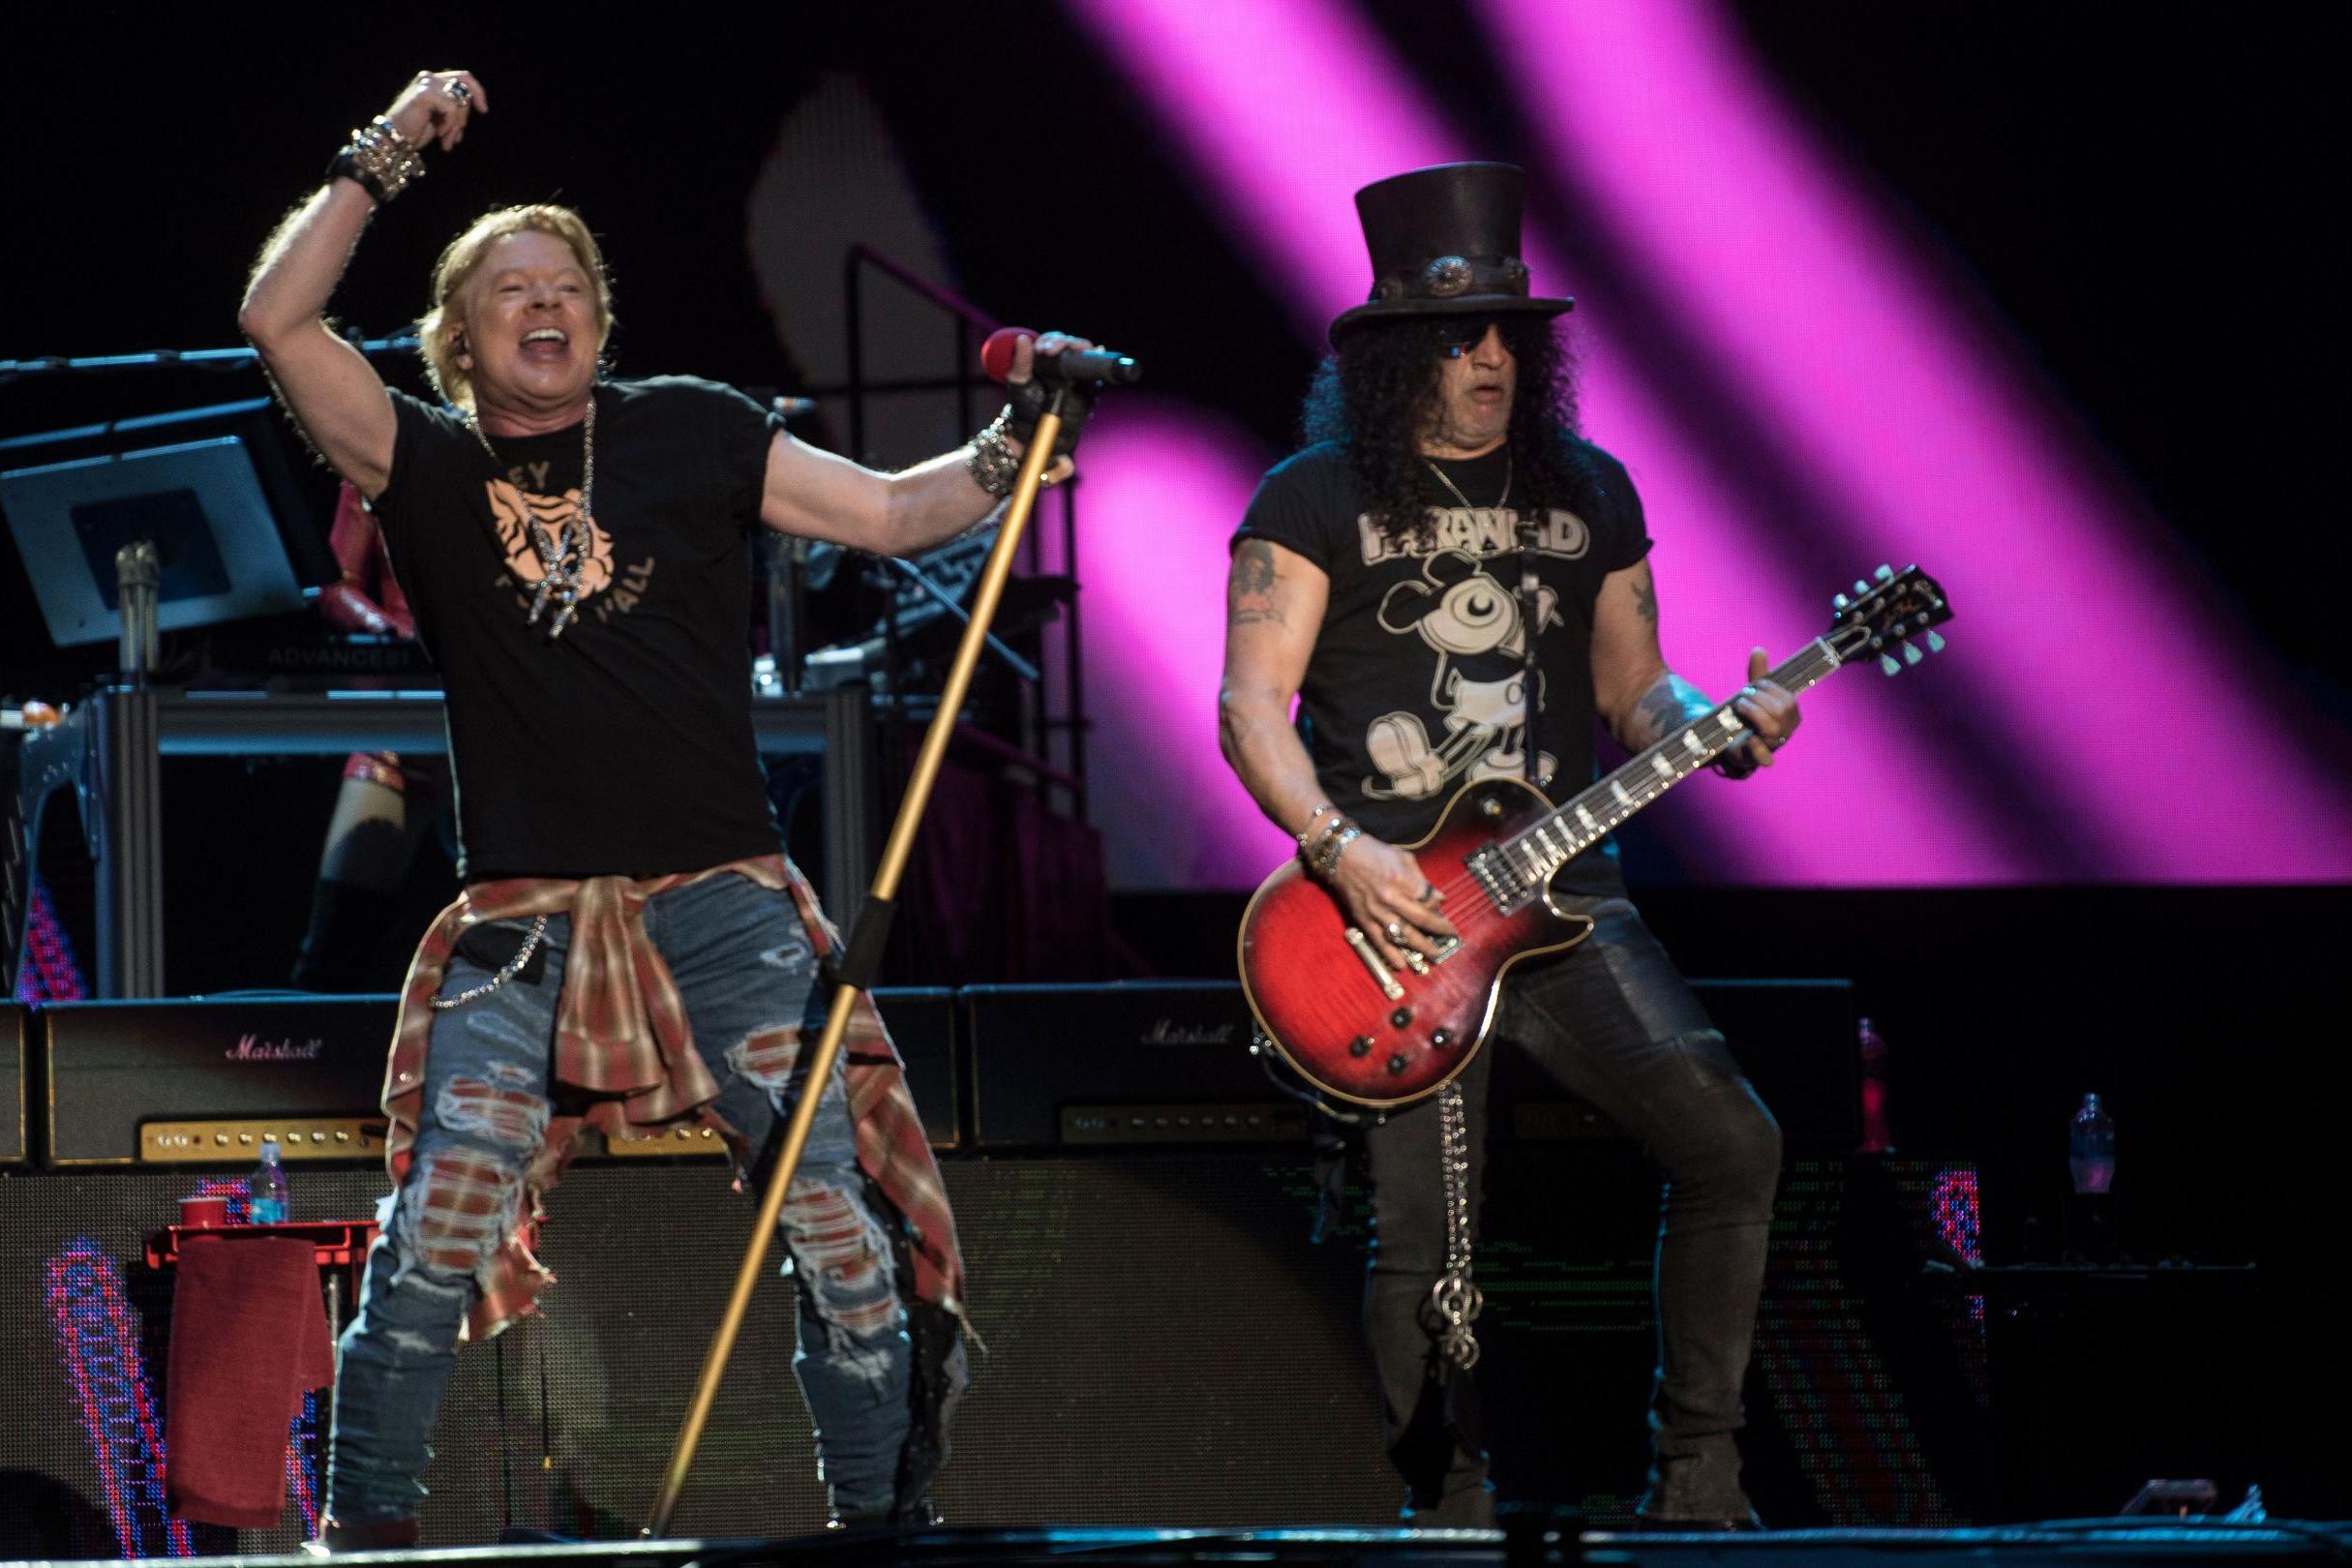 Axl Rose and Slash of Guns N' Roses perform during the Vive Latino festival in Mexico City on 14 March 2020.